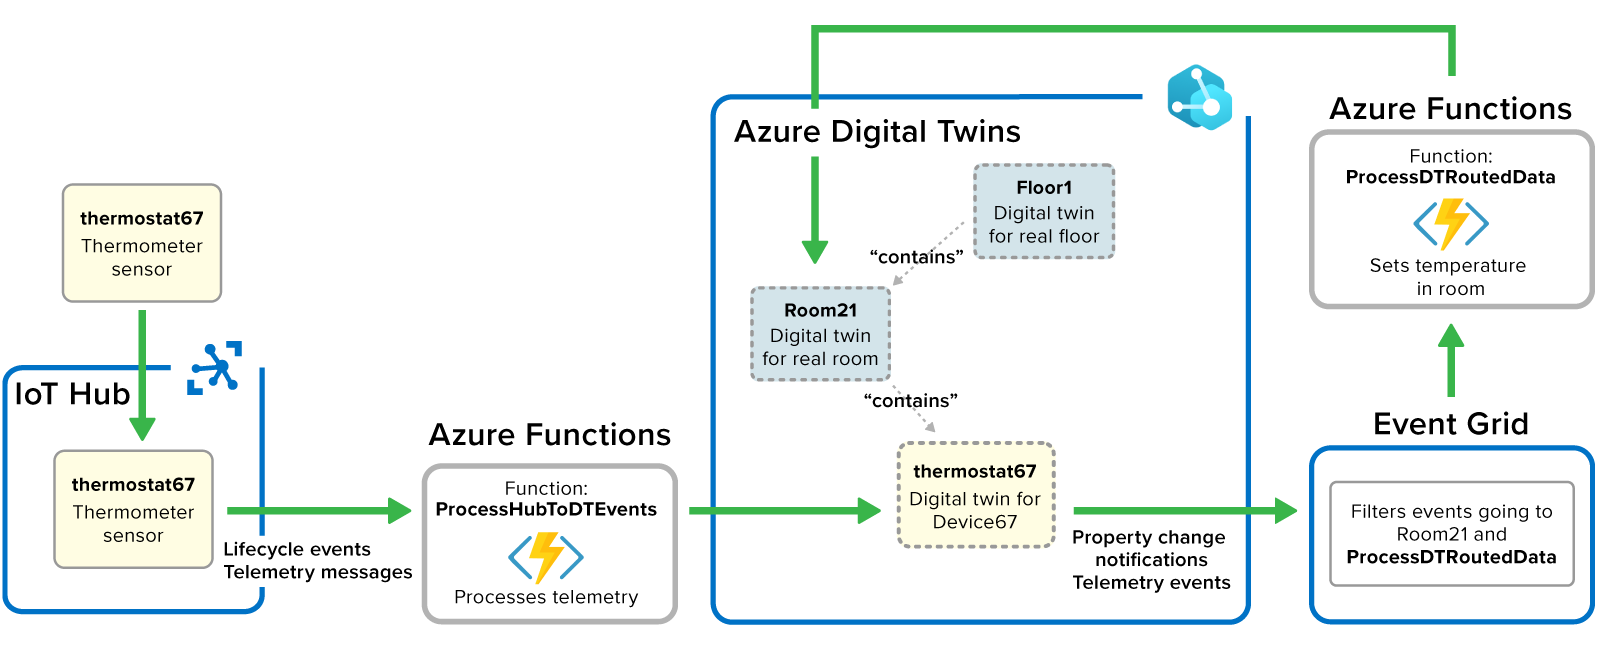 Azure Digital Twins tutorial example showing the use of serverless functions for message processing and property updates